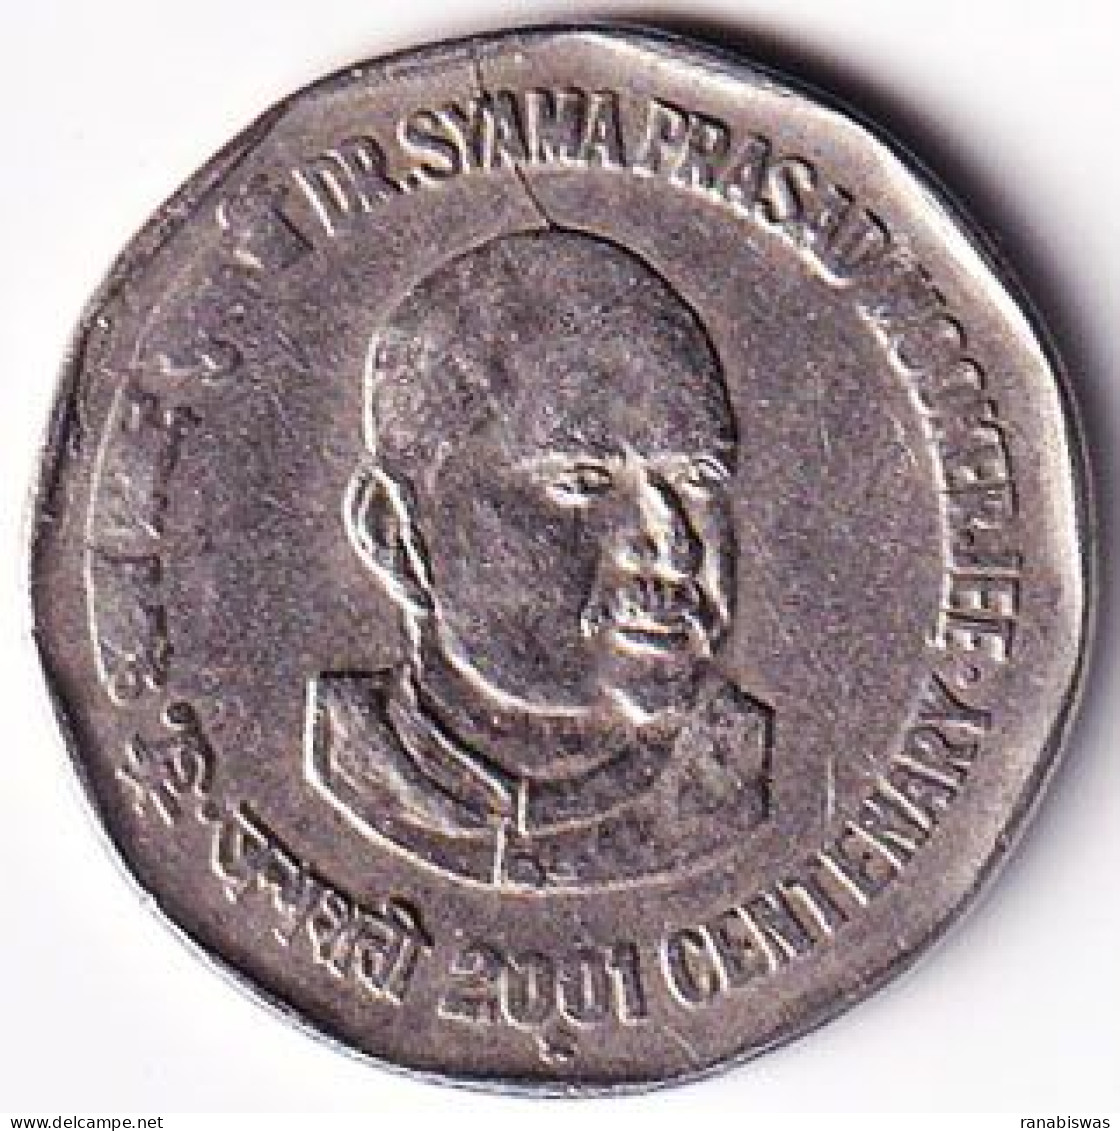 INDIA COIN LOT 19, 2 RUPEES 2001, DR. SHYAMA PRASAD MOOKERJEE, HYDERABAD MINT, XF, SCARE - India